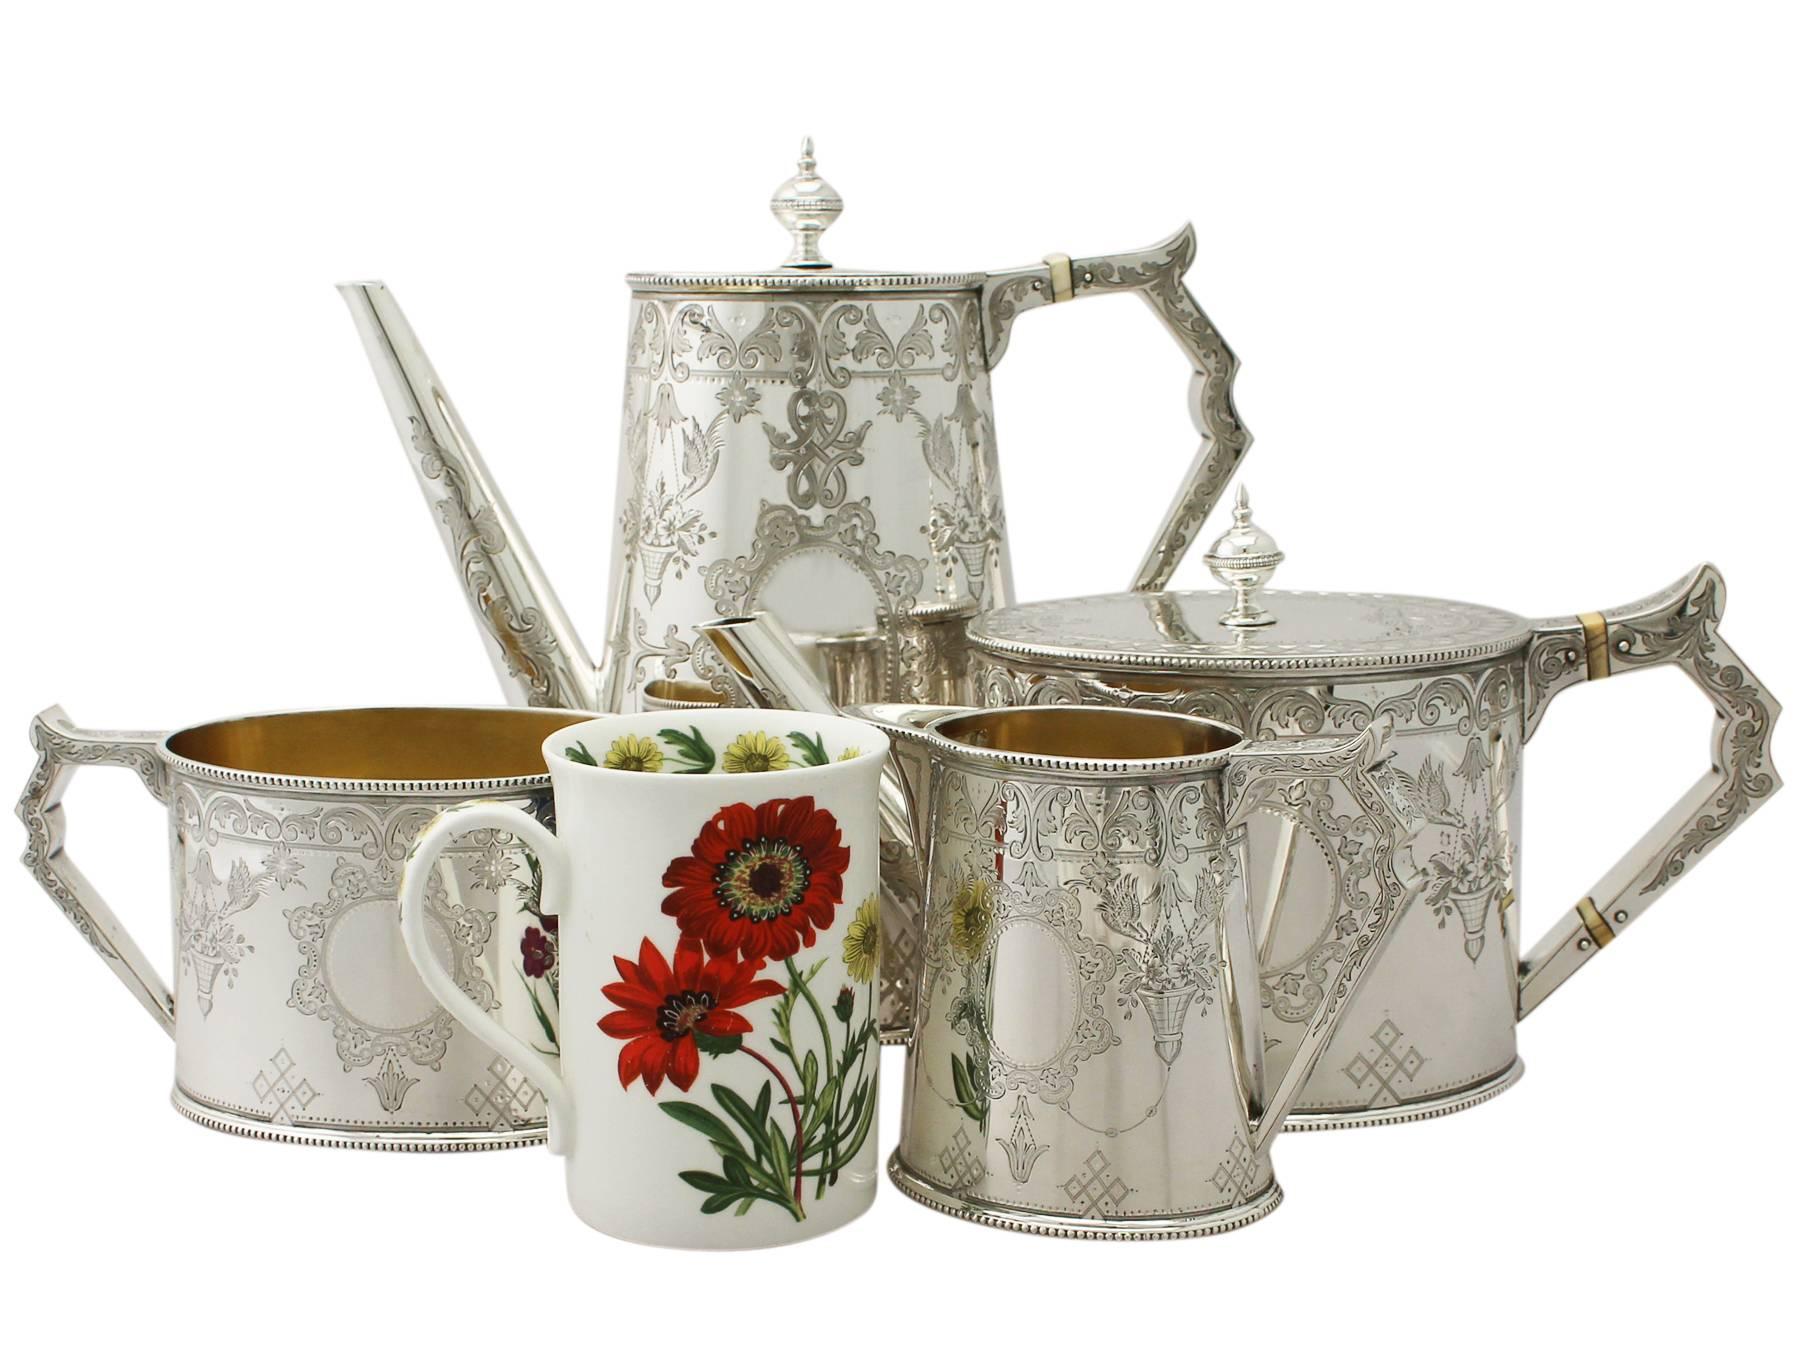 An exceptional, fine and impressive antique Victorian English sterling silver four piece tea and coffee set/service; an addition to our silver teaware collection.

This exceptional antique Victorian sterling silver four piece tea and coffee